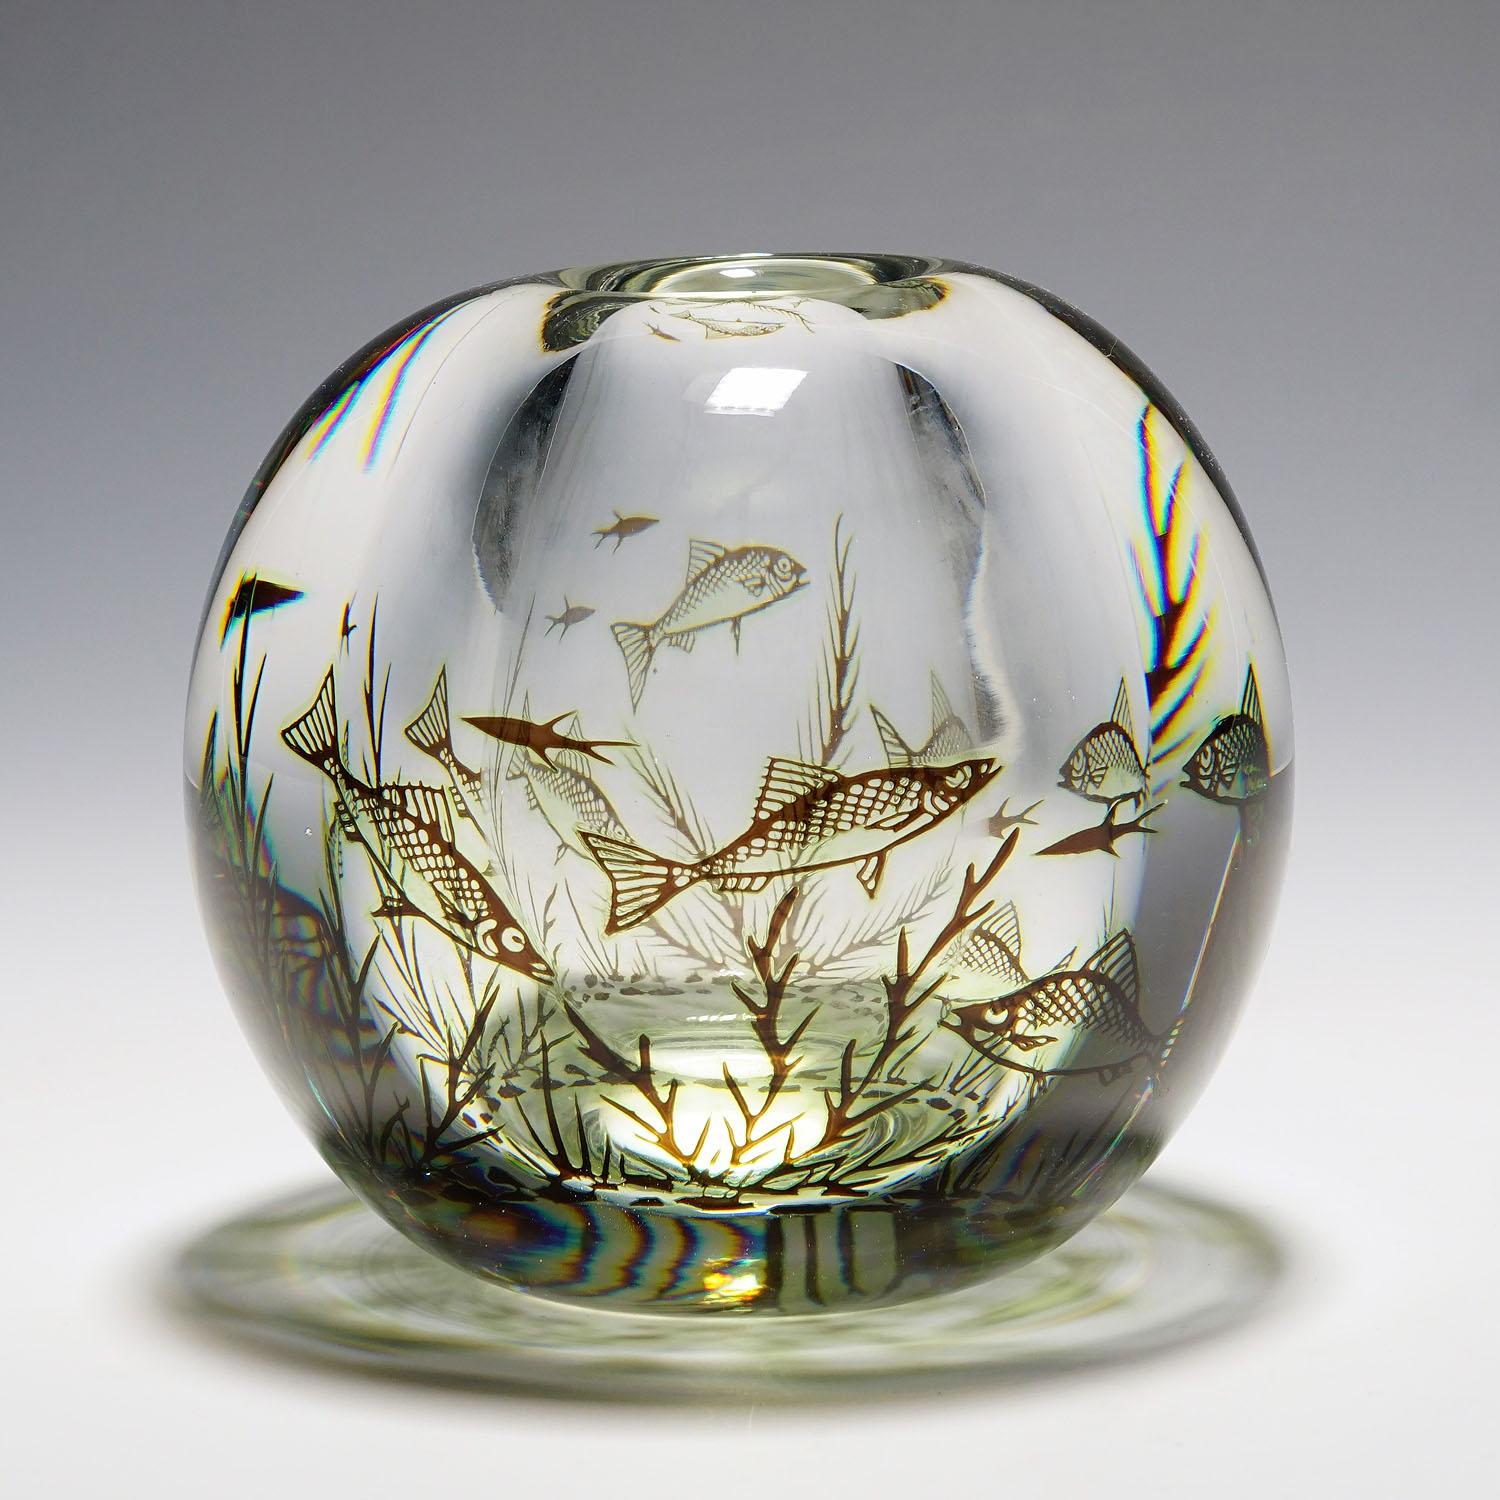 Fish Graal vase by Edward Hald for Orrefors, Sweden 1957.

A heavy vase of the Graal series designed by Edvward Hald for Orrefors Sweden in 1938. Clear and green glas decorated with underwater flora and fishes, overlayed with a thick clear glass